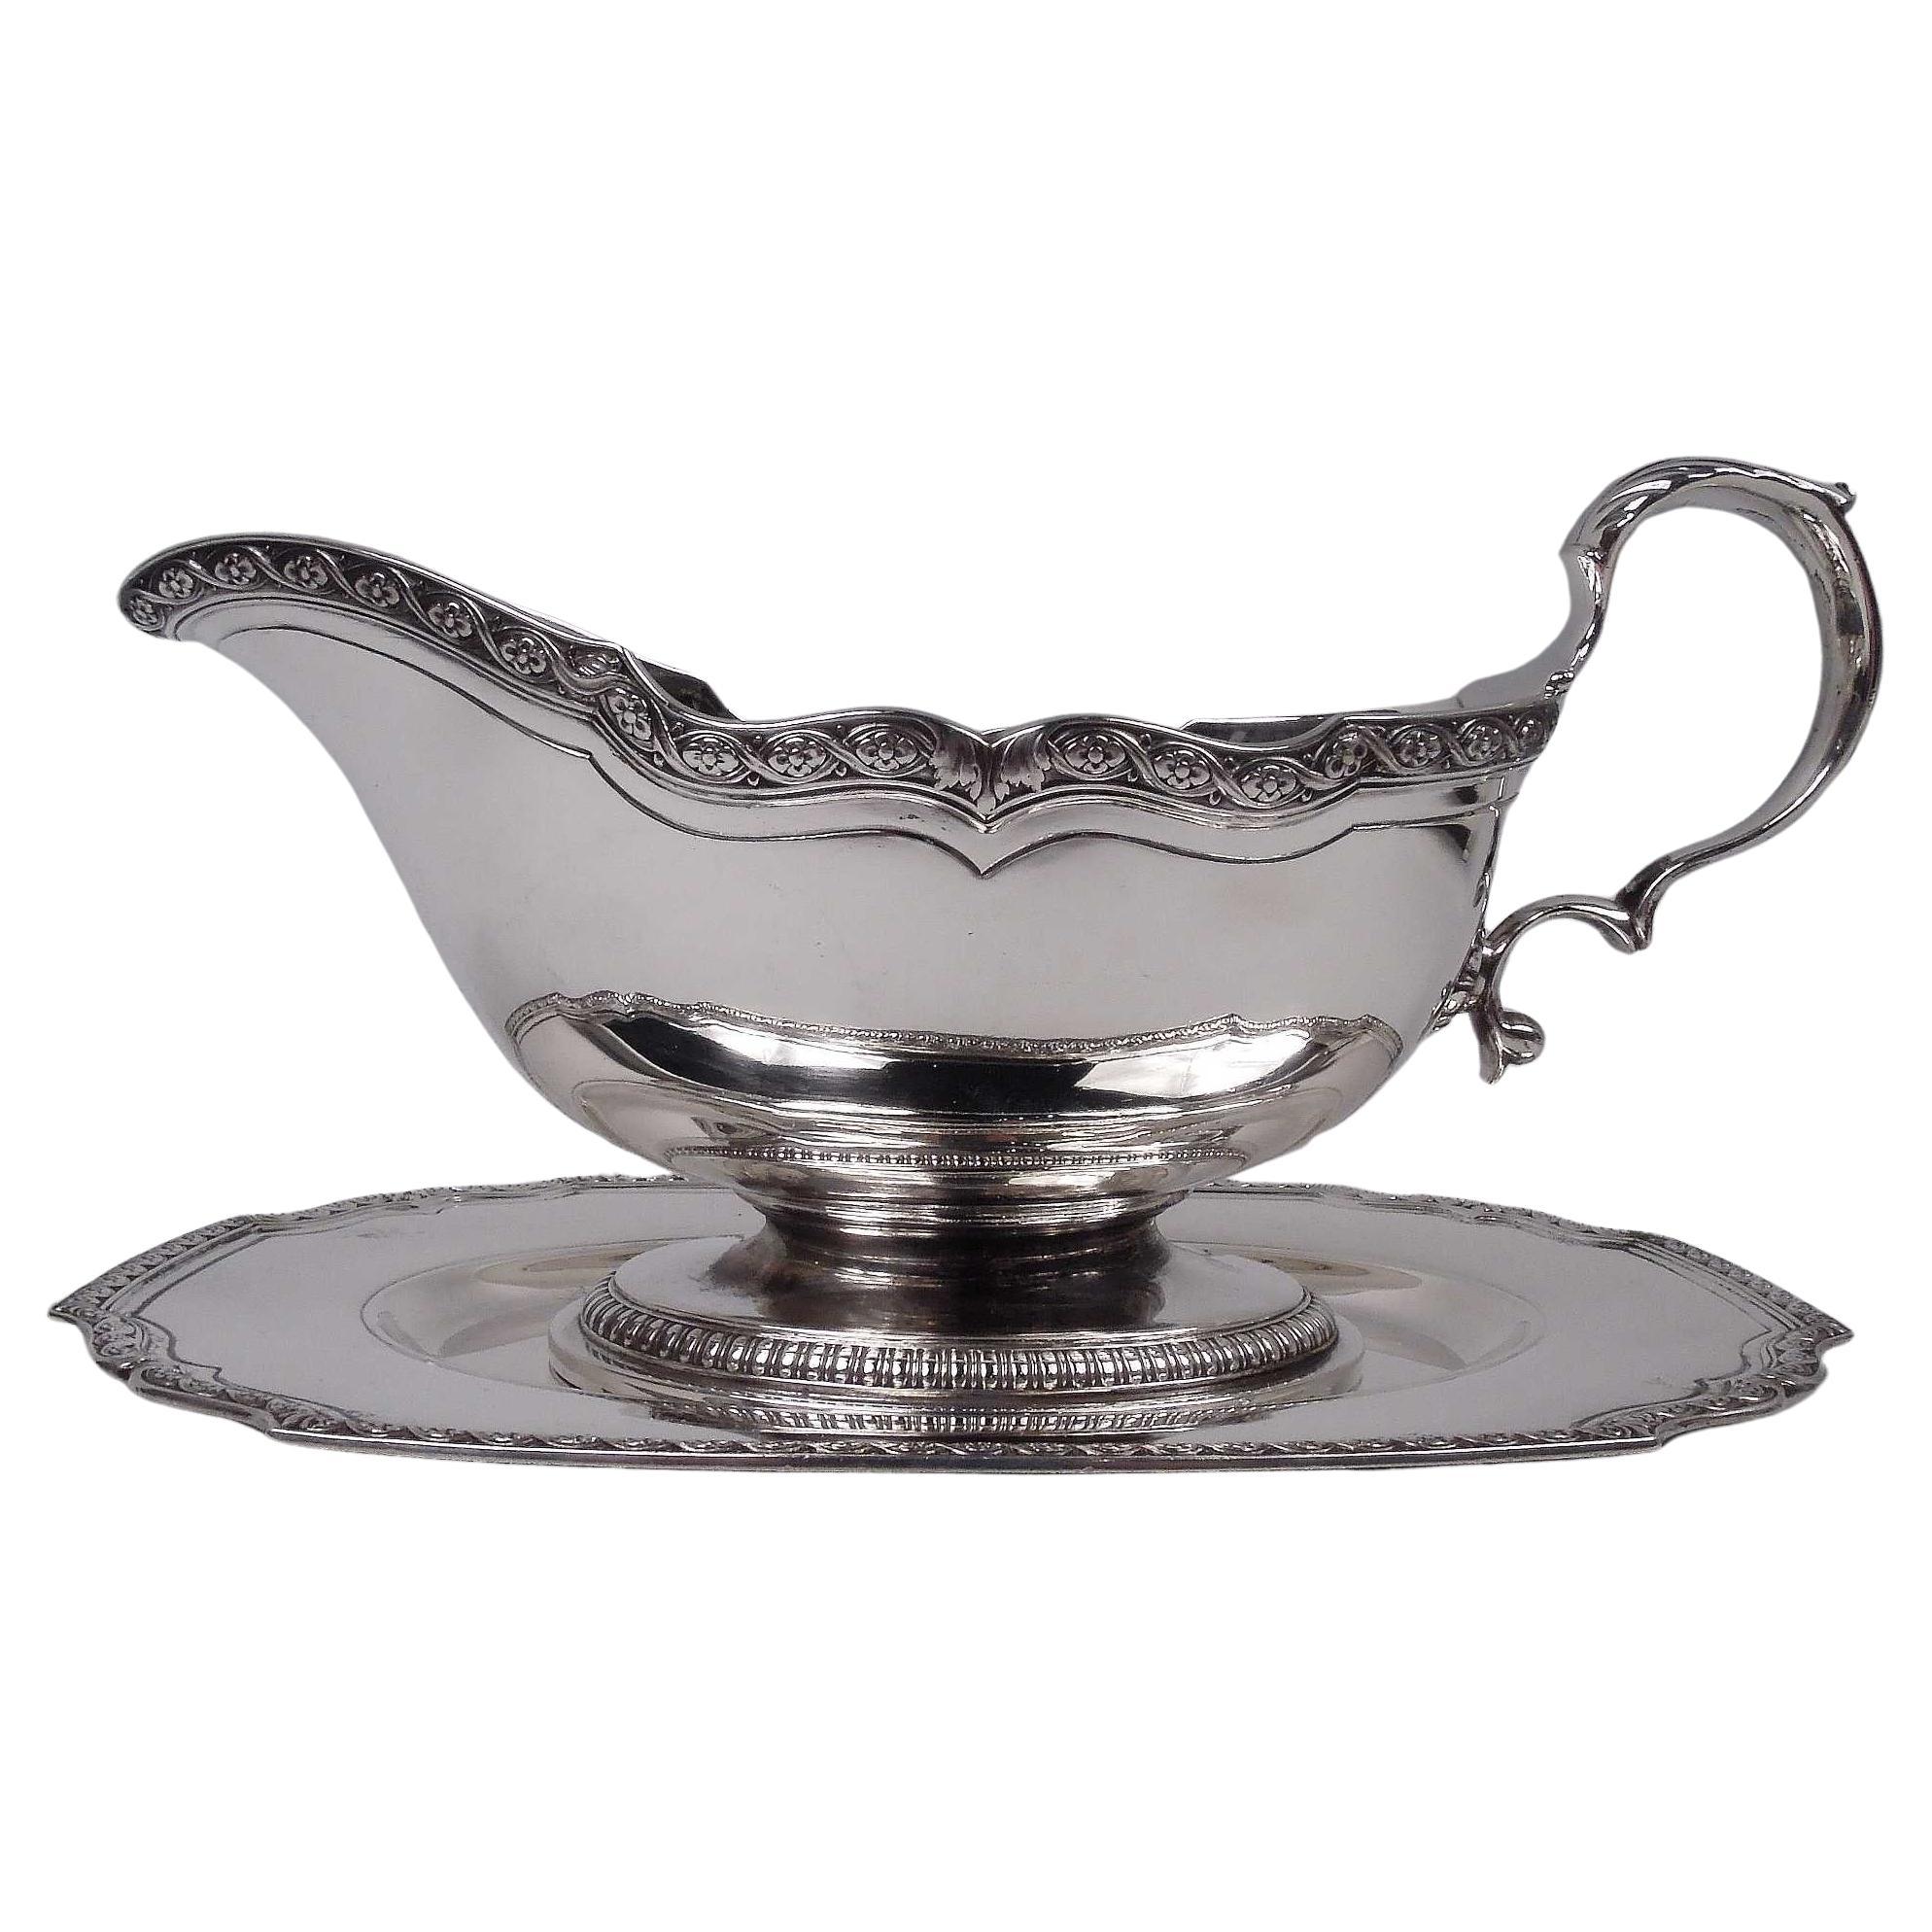 Tiffany Edwardian Classical Sterling Silver Gravy Boat on Stand For Sale